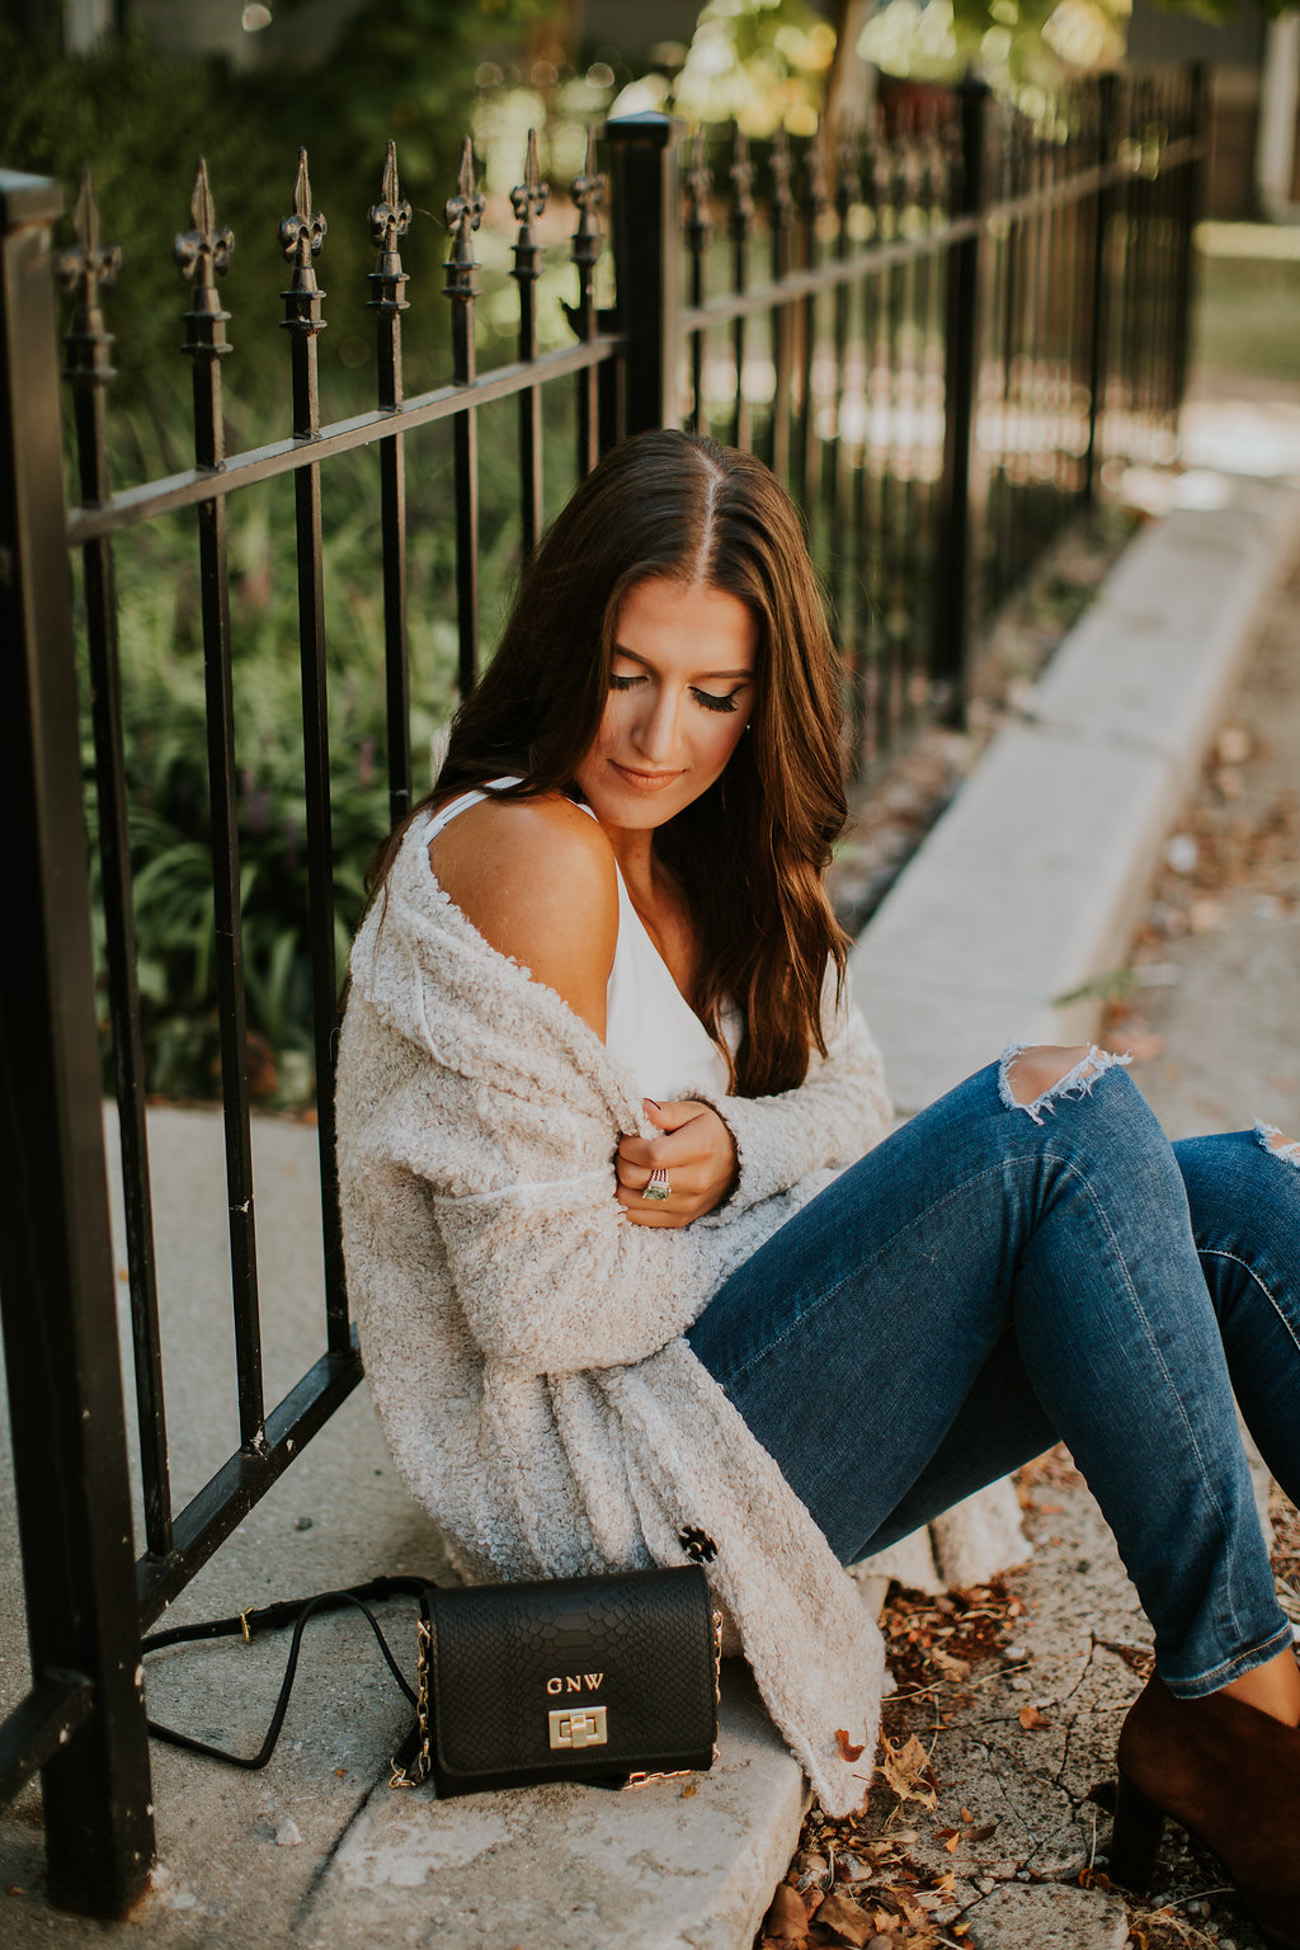 free people boucle cardigan, free people cardigan, ag distressed skinny jeans, lace up booties, fall style, cozy fall outfit, monogram crossbody bag, black monogram crossbody bag, ribbon choker necklace, southern fashion, fall fashion // grace wainwright a southern drawl